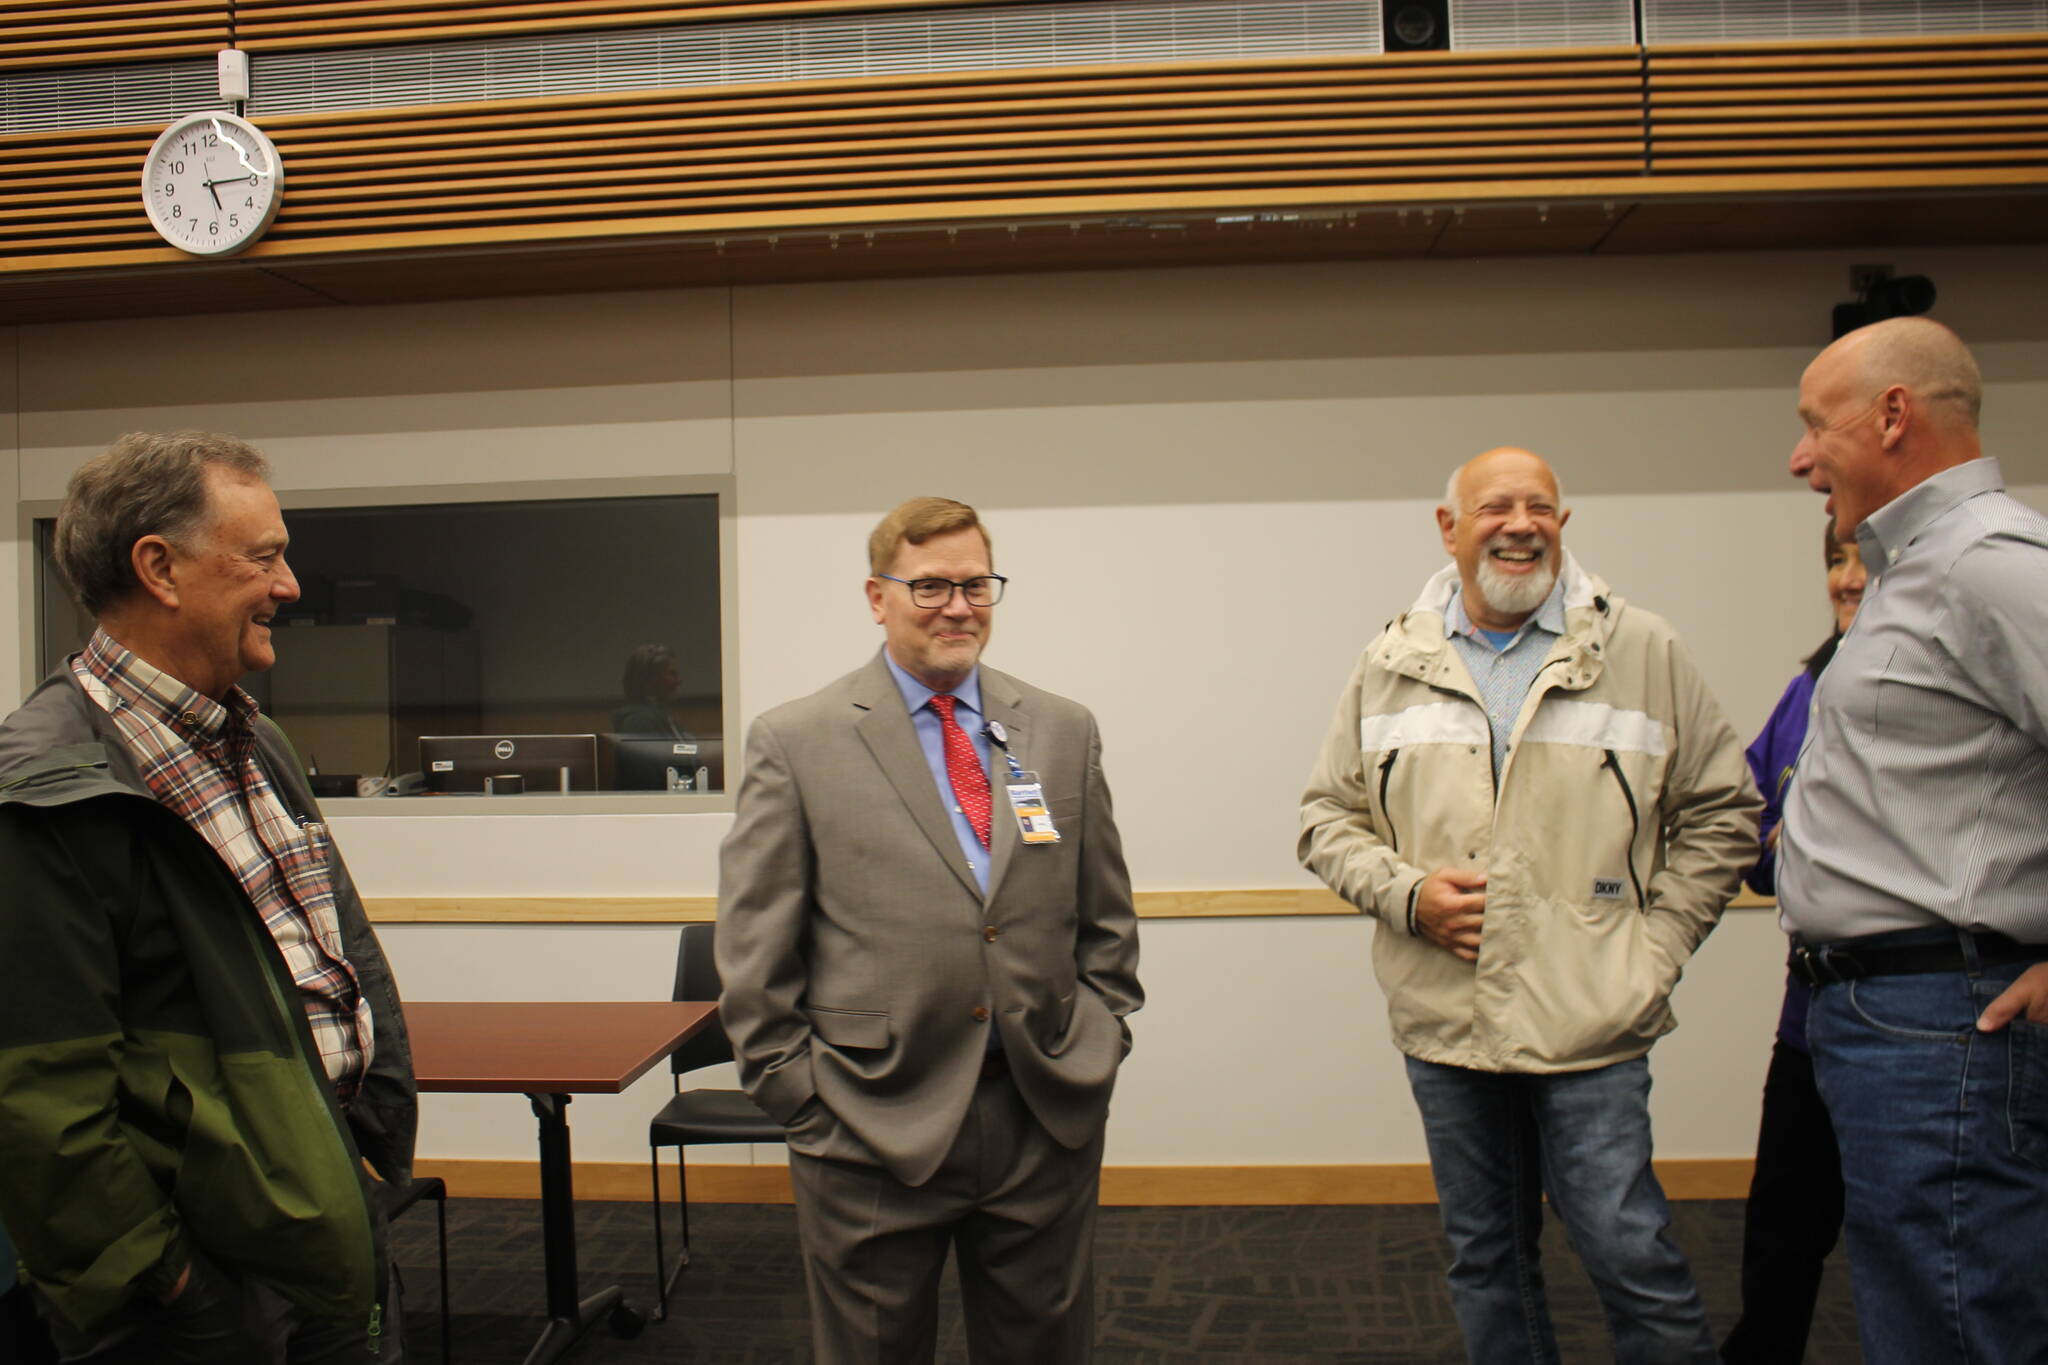 Bartlett Regional Hospital's CEO finalist Jeffery Hudson-Covolo (left-center) chats with community members and members of the BRH Board of Directors at his public meet and greet for the potential position. (Clarise Larson / Juneau Empire)